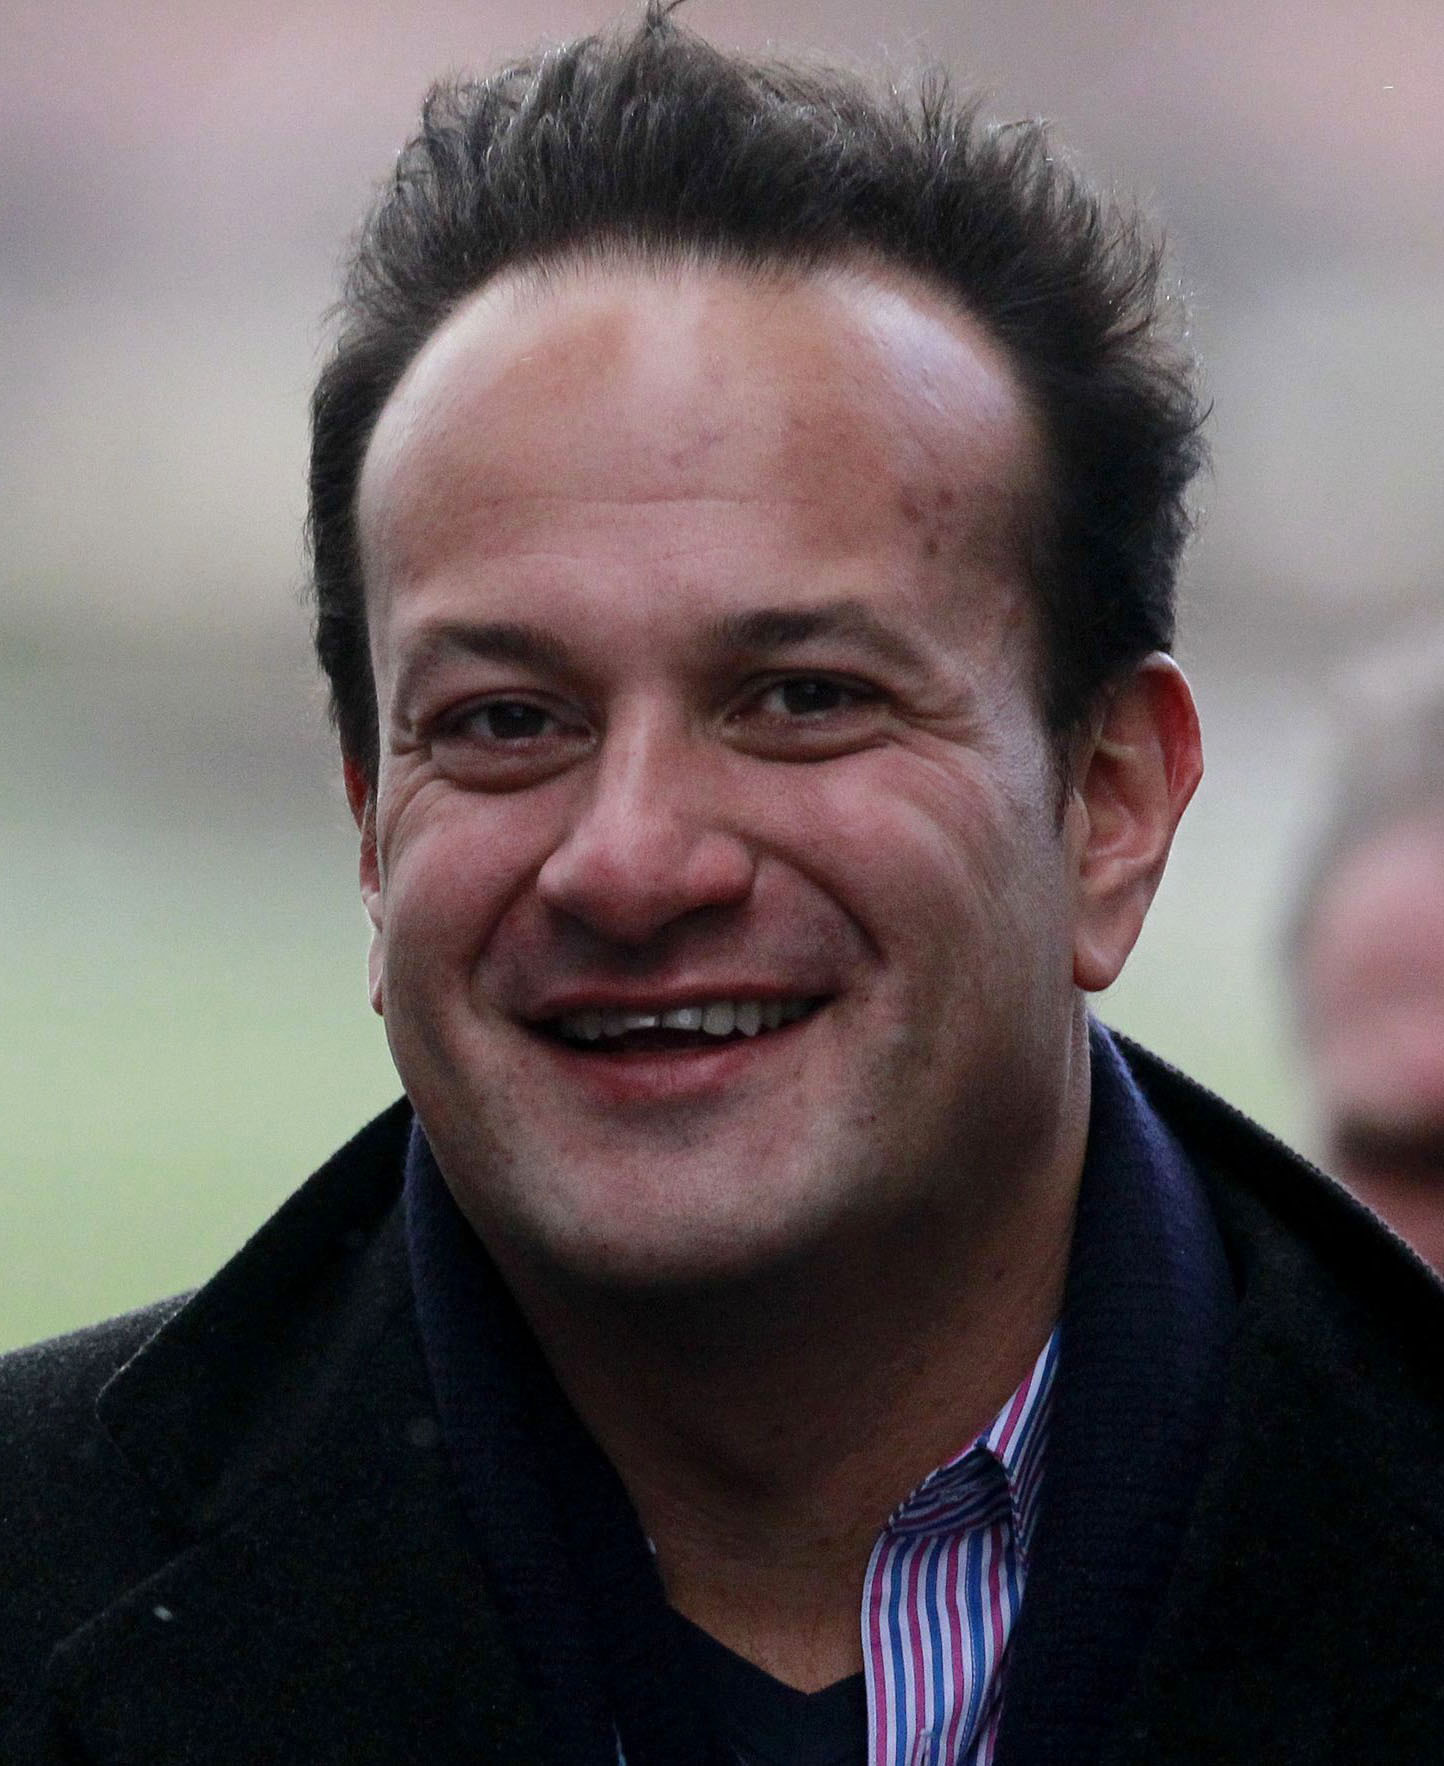 Irish Health minister Leo Varadkar, 36, who has publicly come out as gay, pictured here on Dec. 27, 2013.